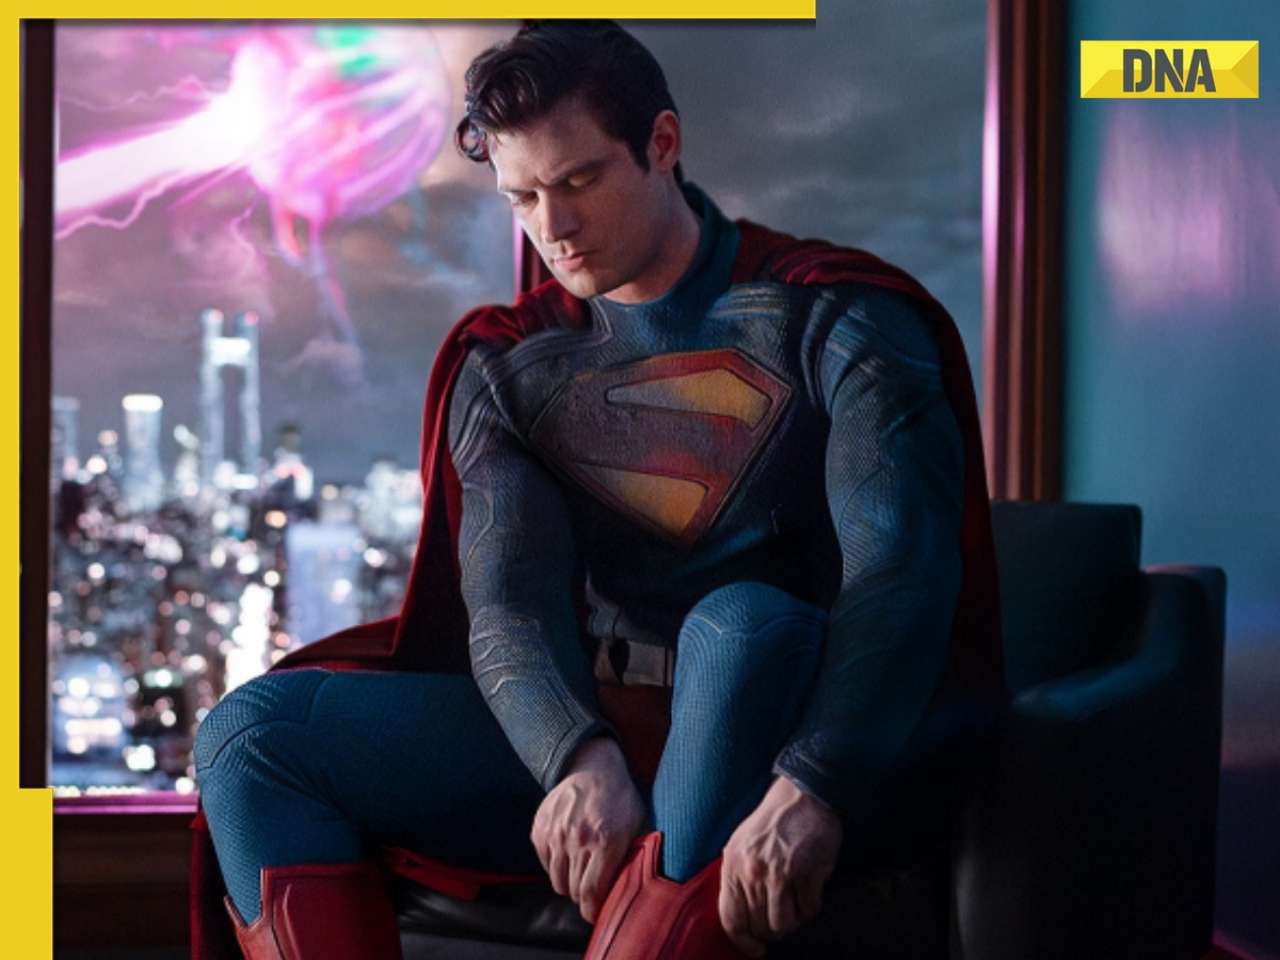 Superman: James Gunn unveils David Corenswet's first look as Man of Steel, fans say 'the suit looks so good'